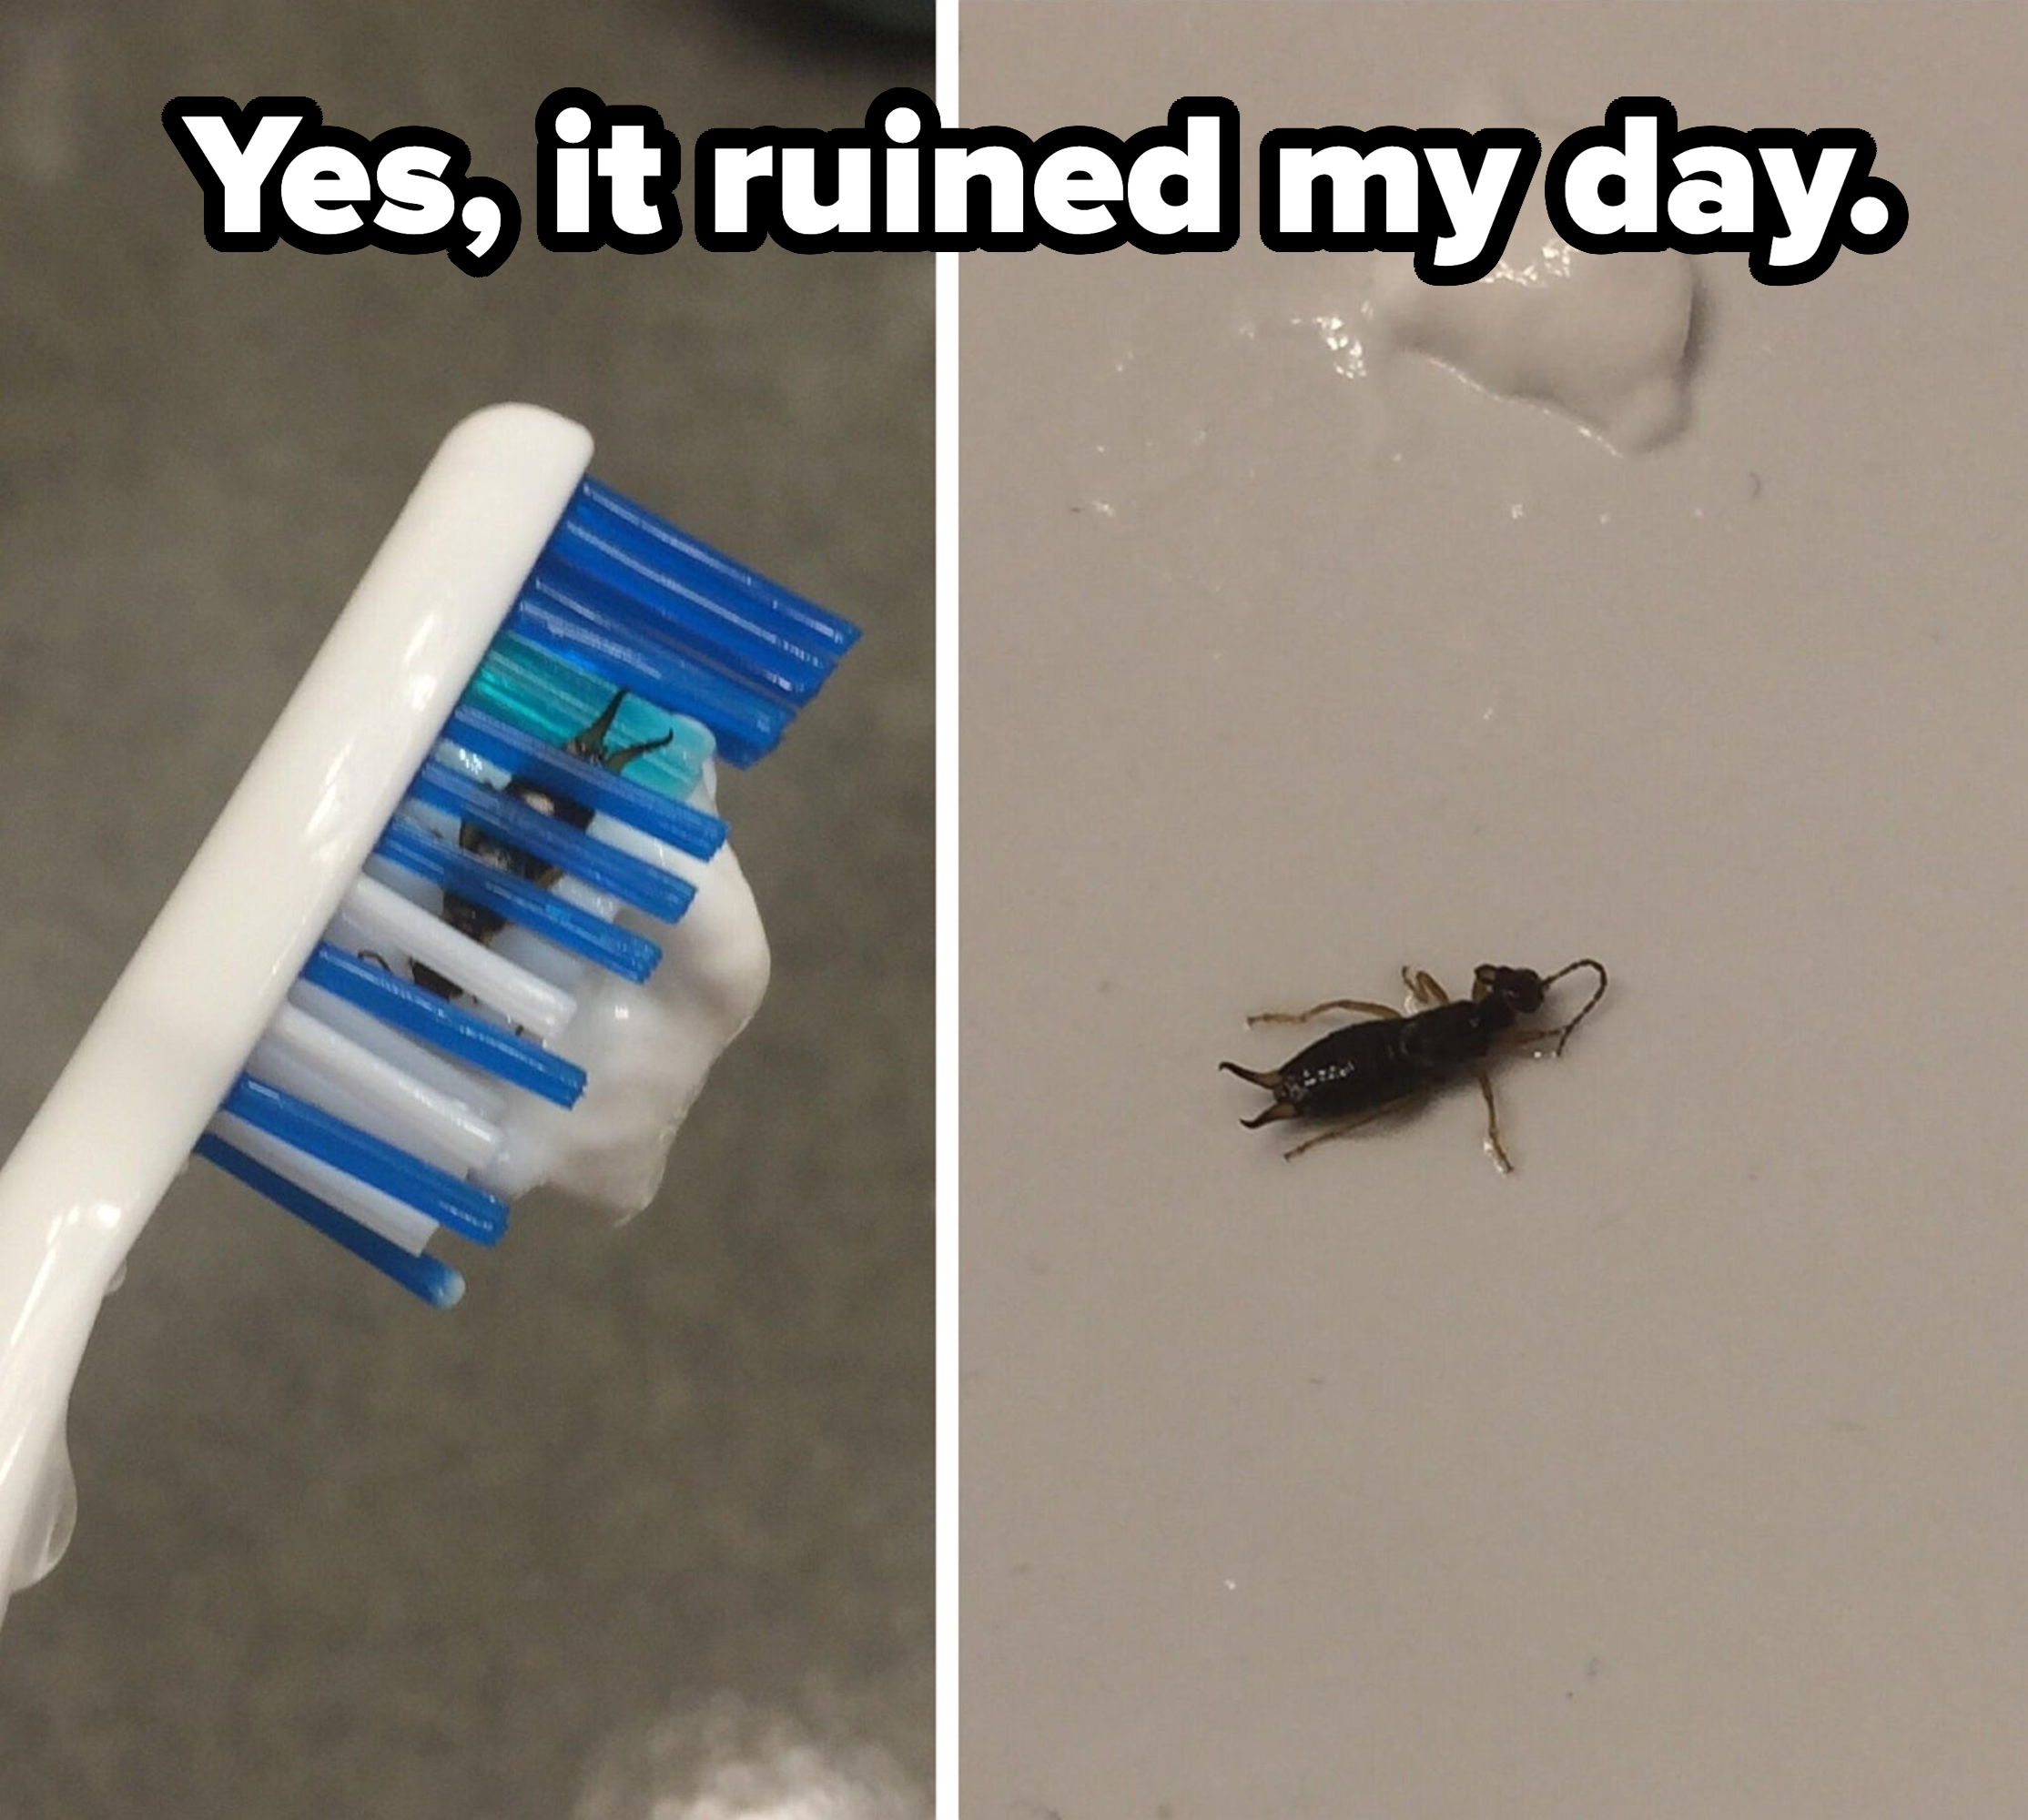 A dead bug in someone&#x27;s toothbrush, with caption, &quot;Yes, it ruined my day&quot;